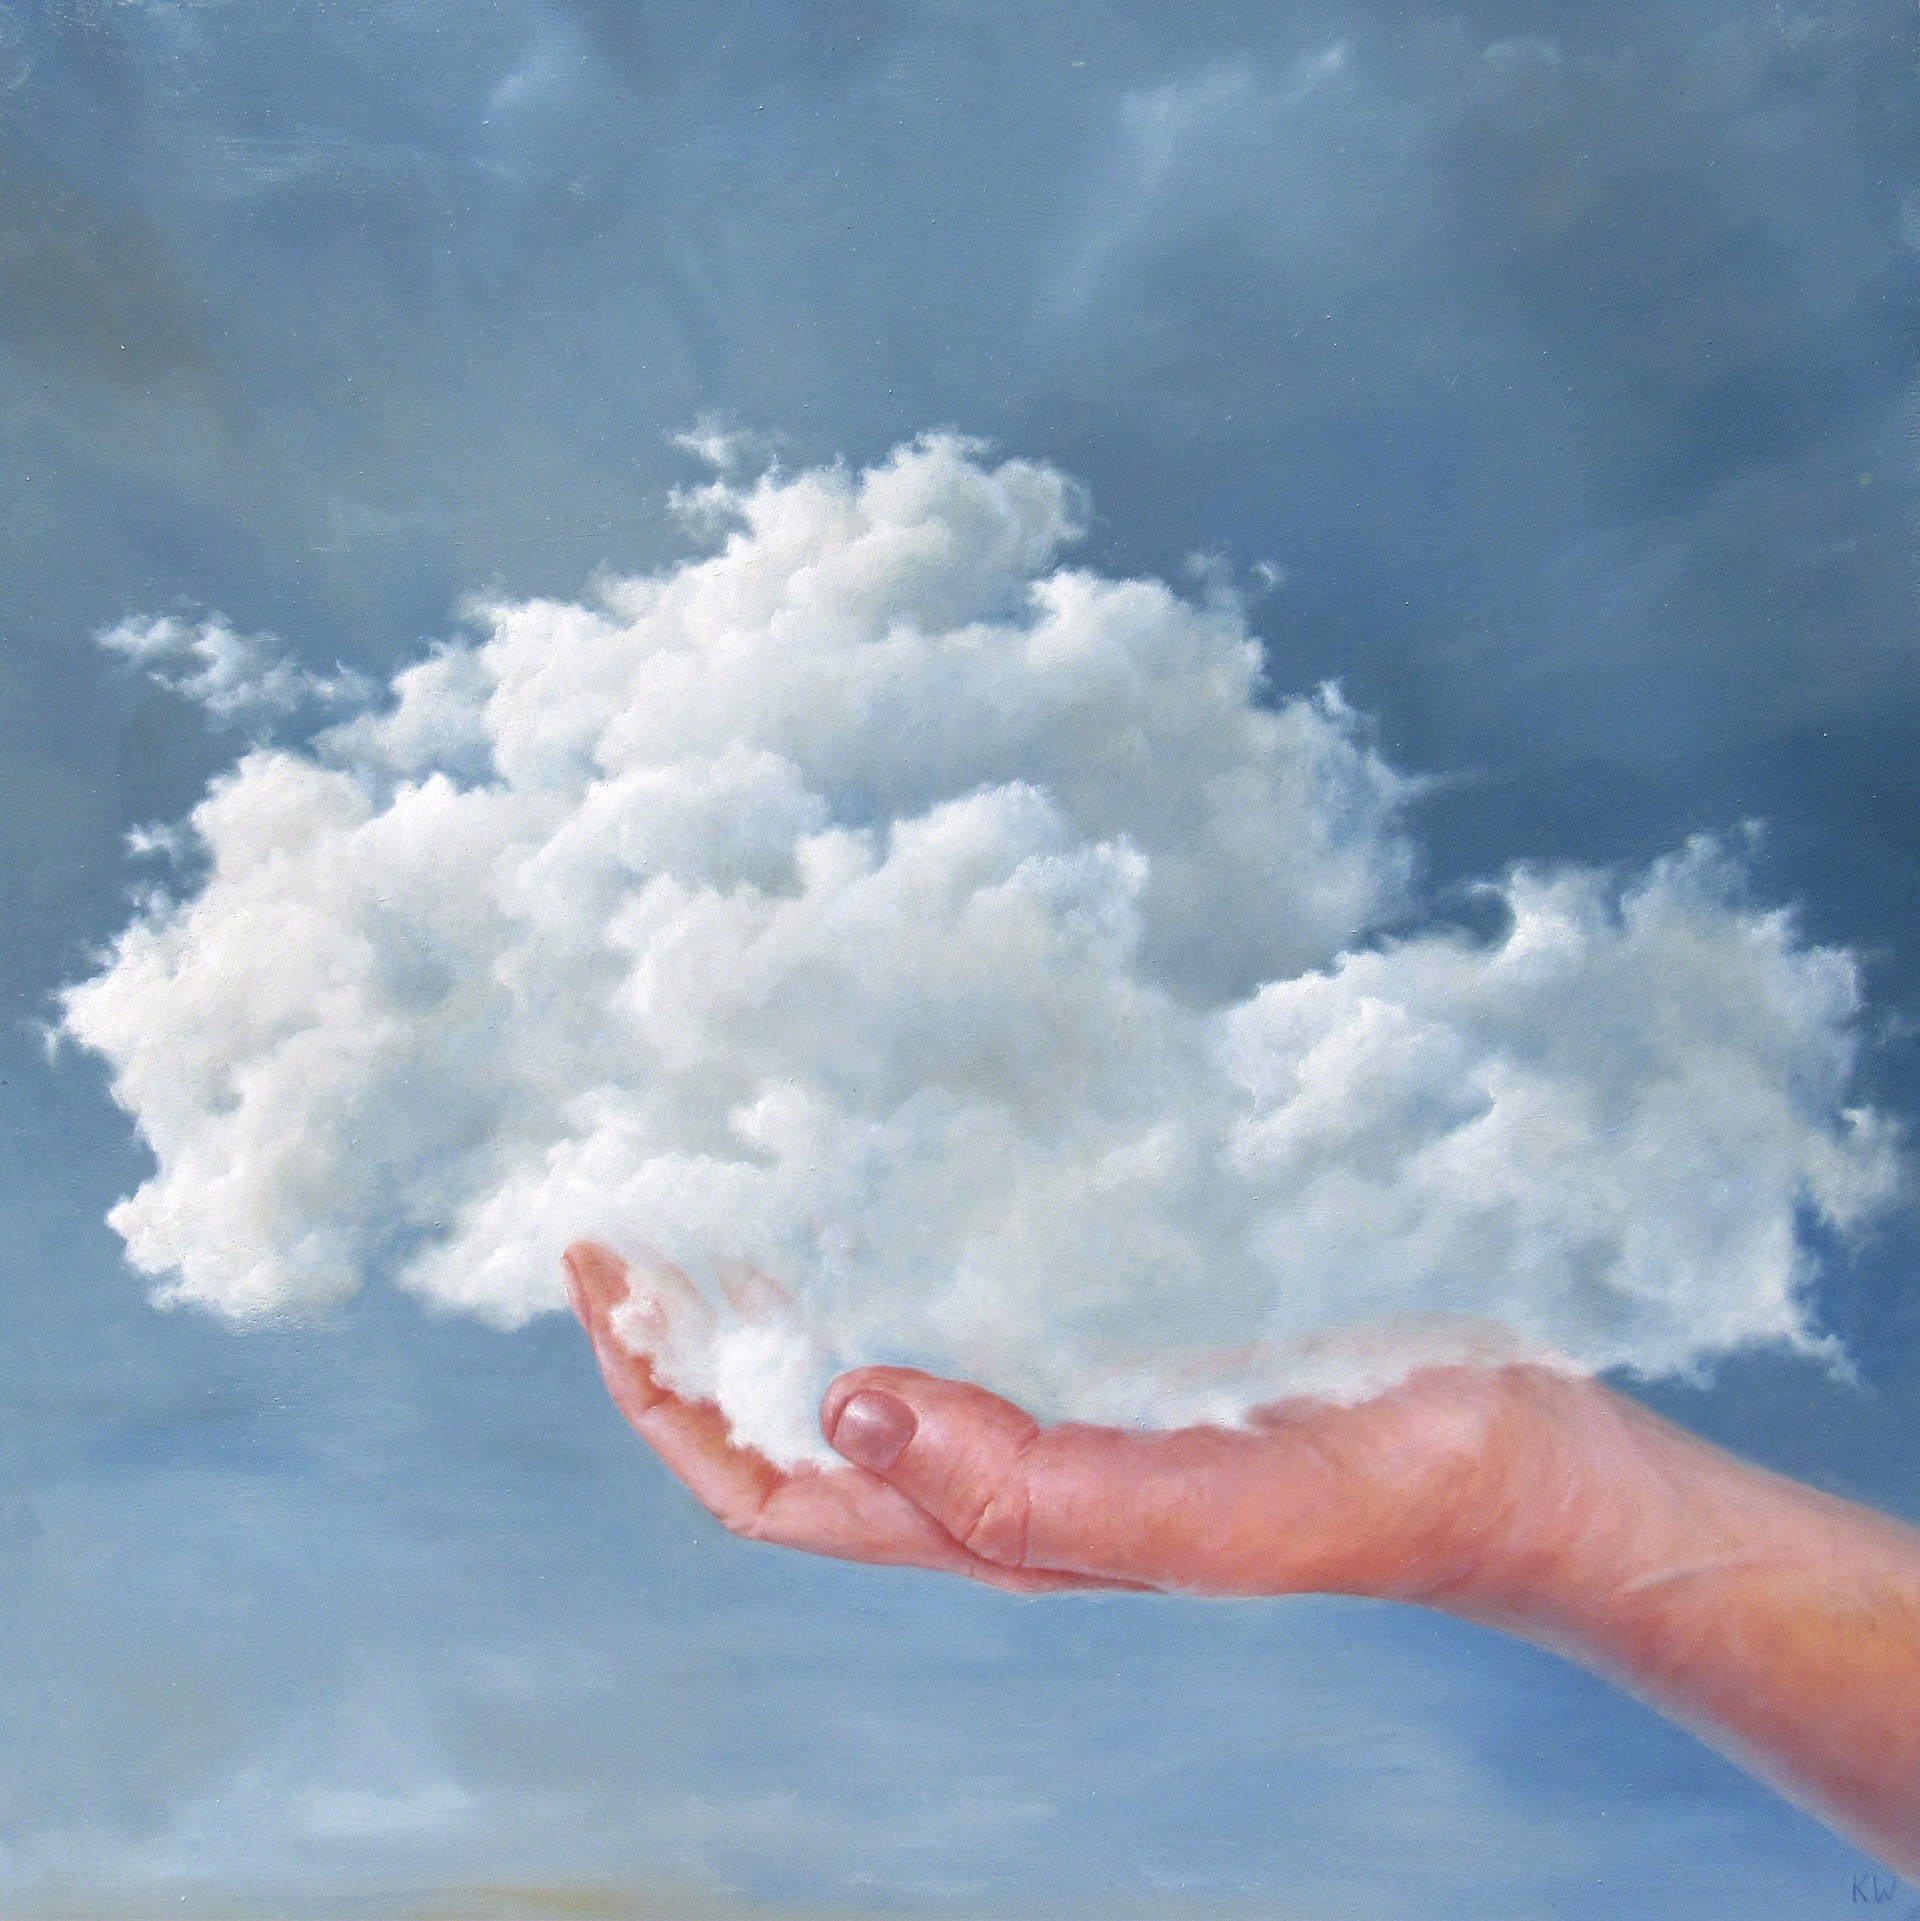 hold me in your hand like a cloud by Kris Wenschuh